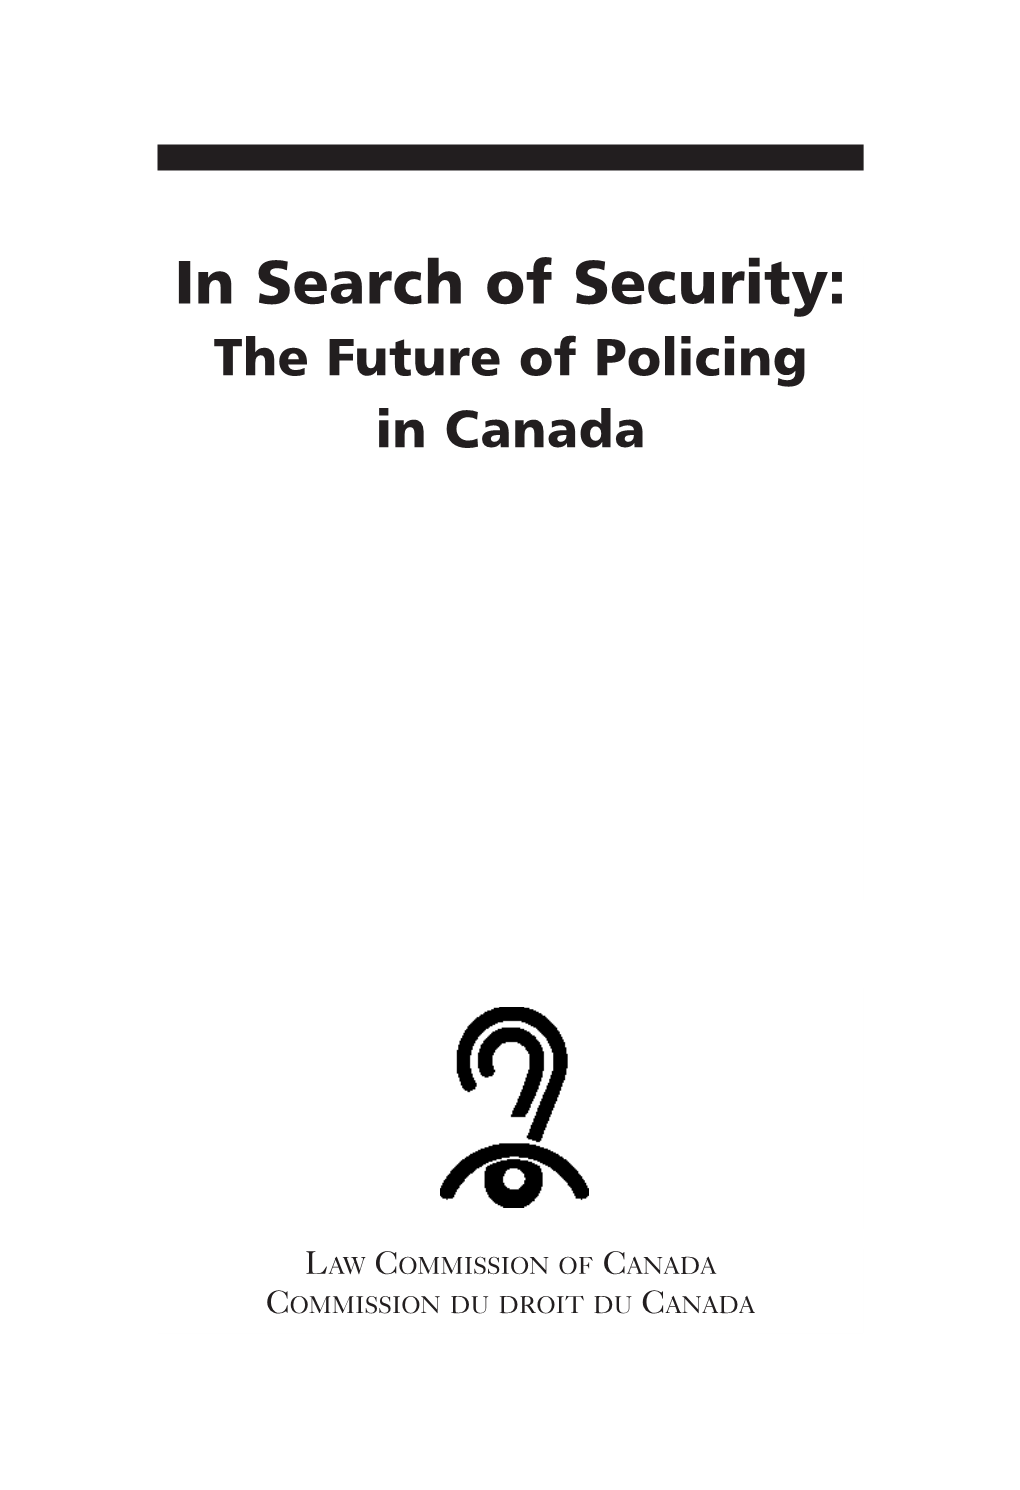 In Search of Security: the Future of Policing in Canada